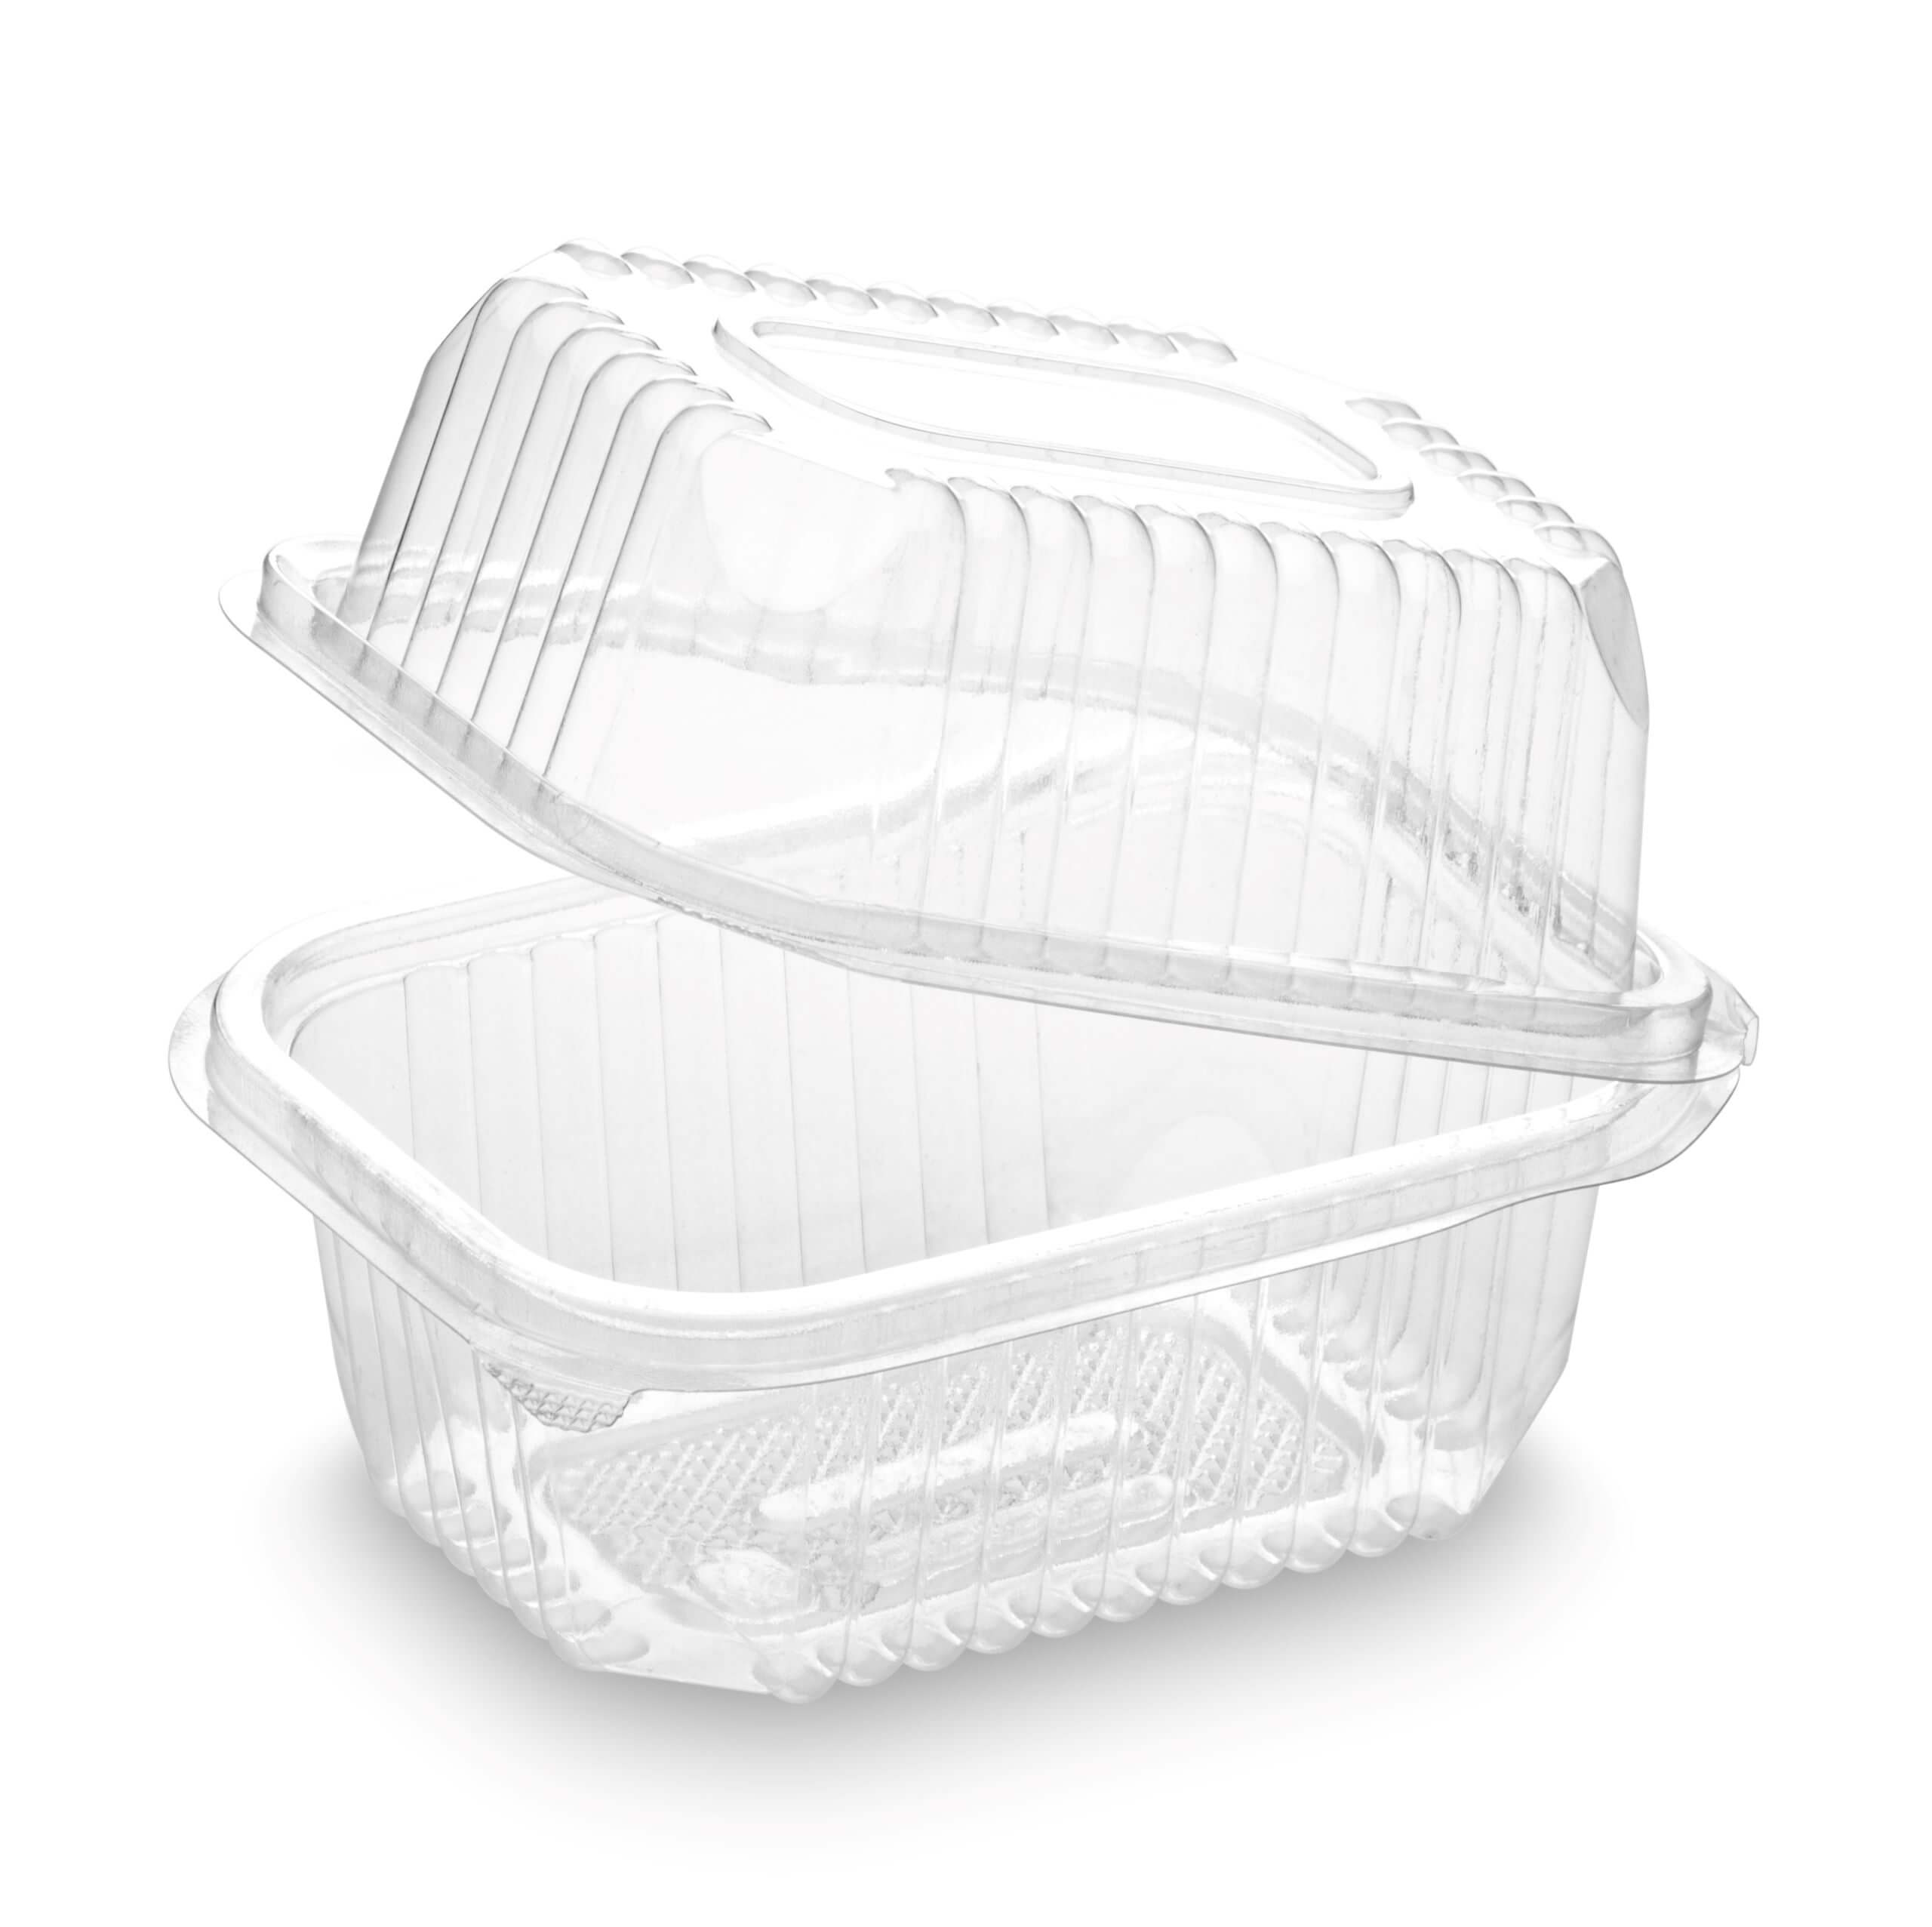 An image of our Hinged Salad Containers.